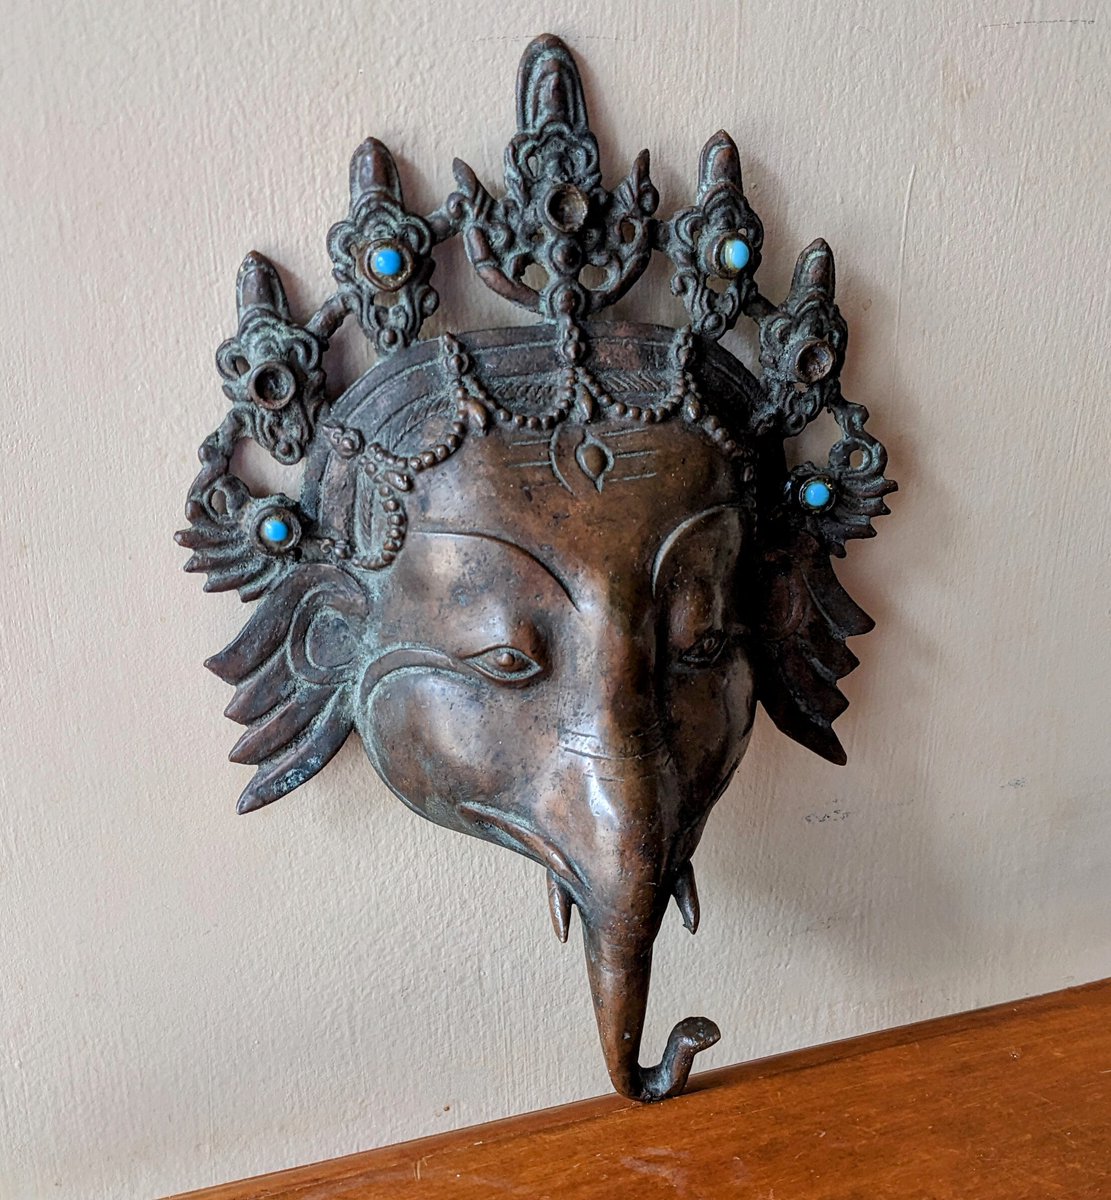 Isn't he beautiful?!  I believe that Karma brought me this piece.  I didn't know who he was when I purchased him, I just loved him.  His face, his patina, his size...everything about him!  The next night my streaming service that knows me so well🙂, suggested a